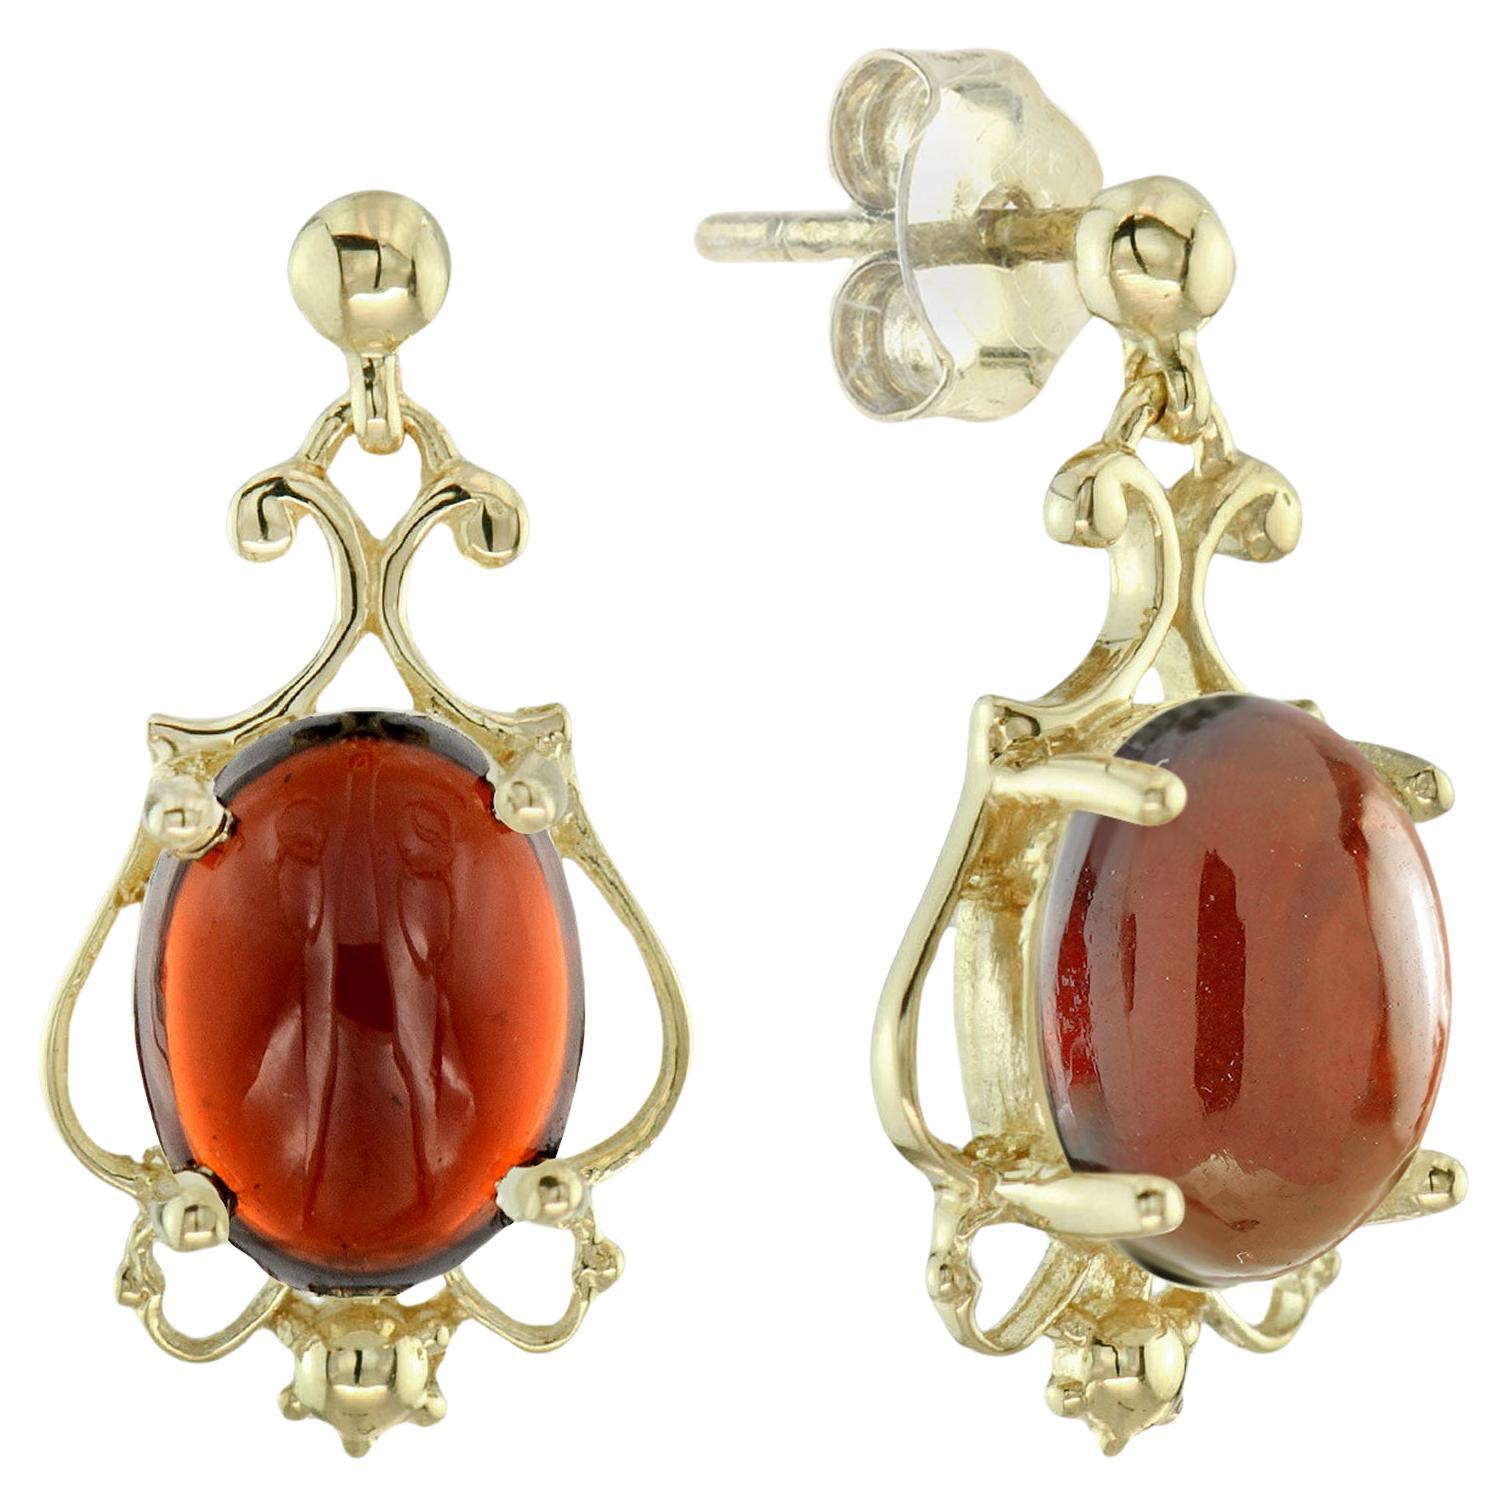 Natural Cabochon Garnet Vintage Style Floral Drop Earrings in Solid 9K Gold